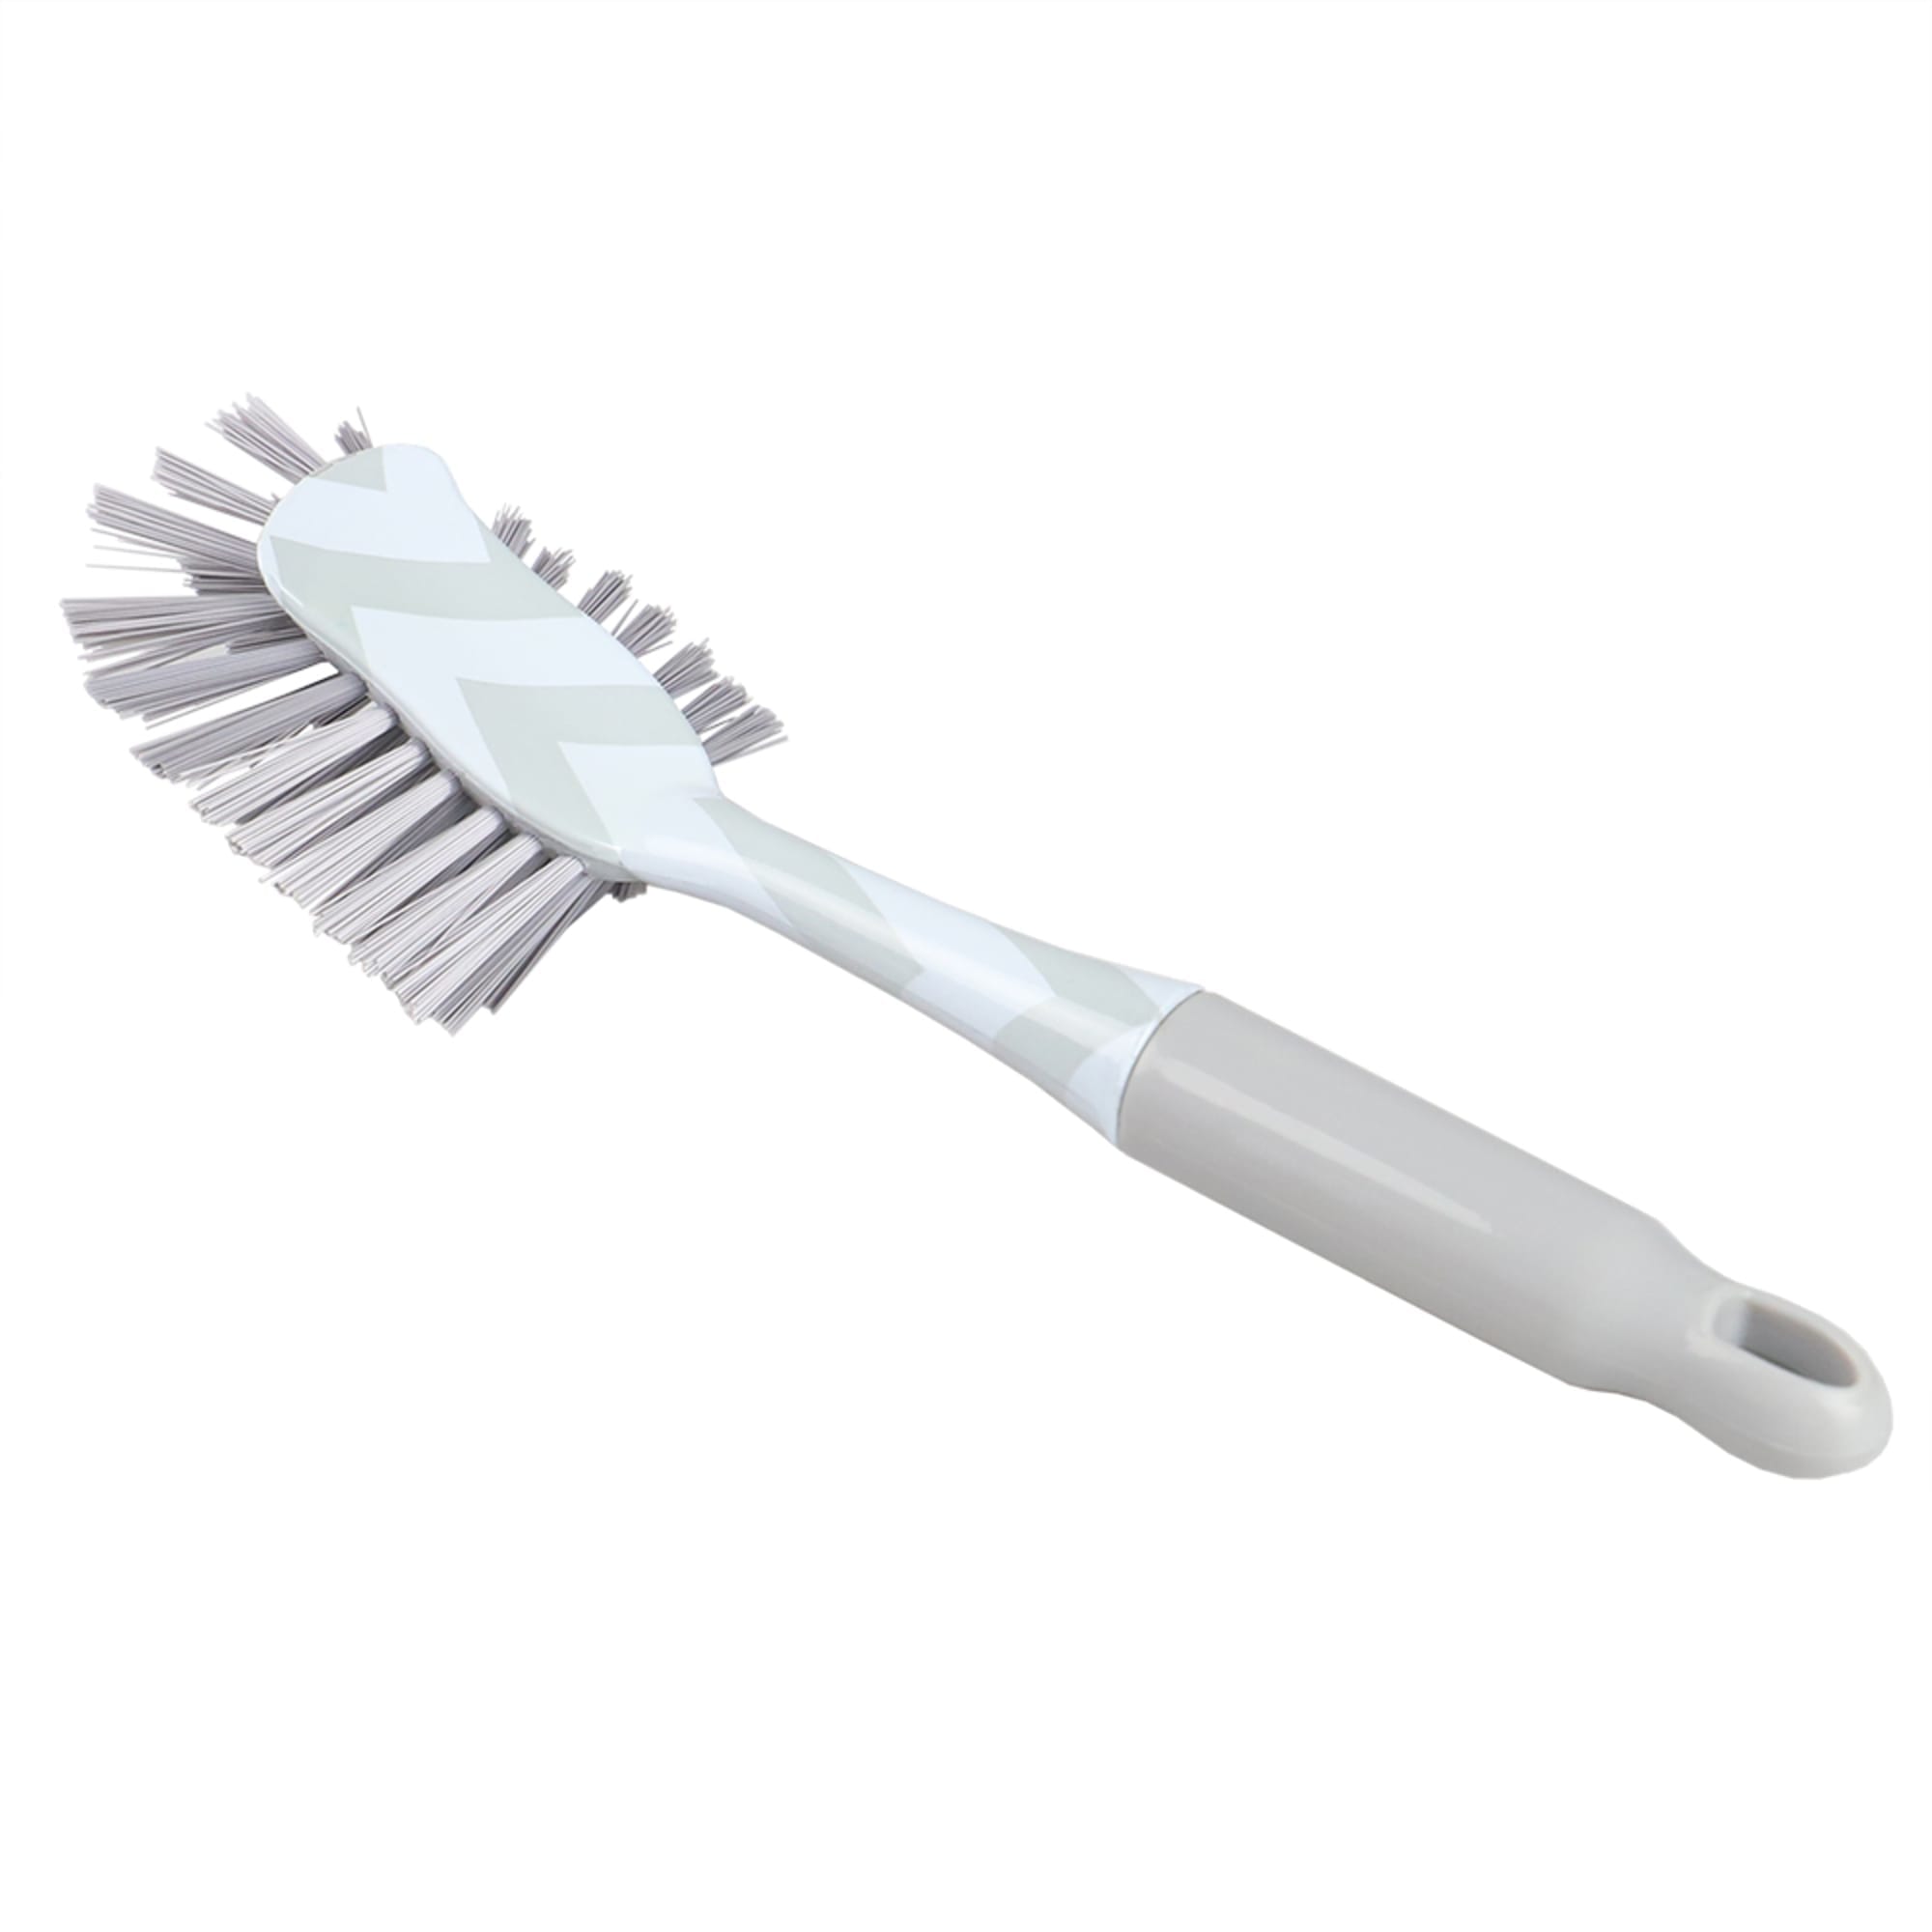 Home Basics Chevron Plastic Dish Brush with Long Non-slip Rubber Handle, Grey $2.00 EACH, CASE PACK OF 12